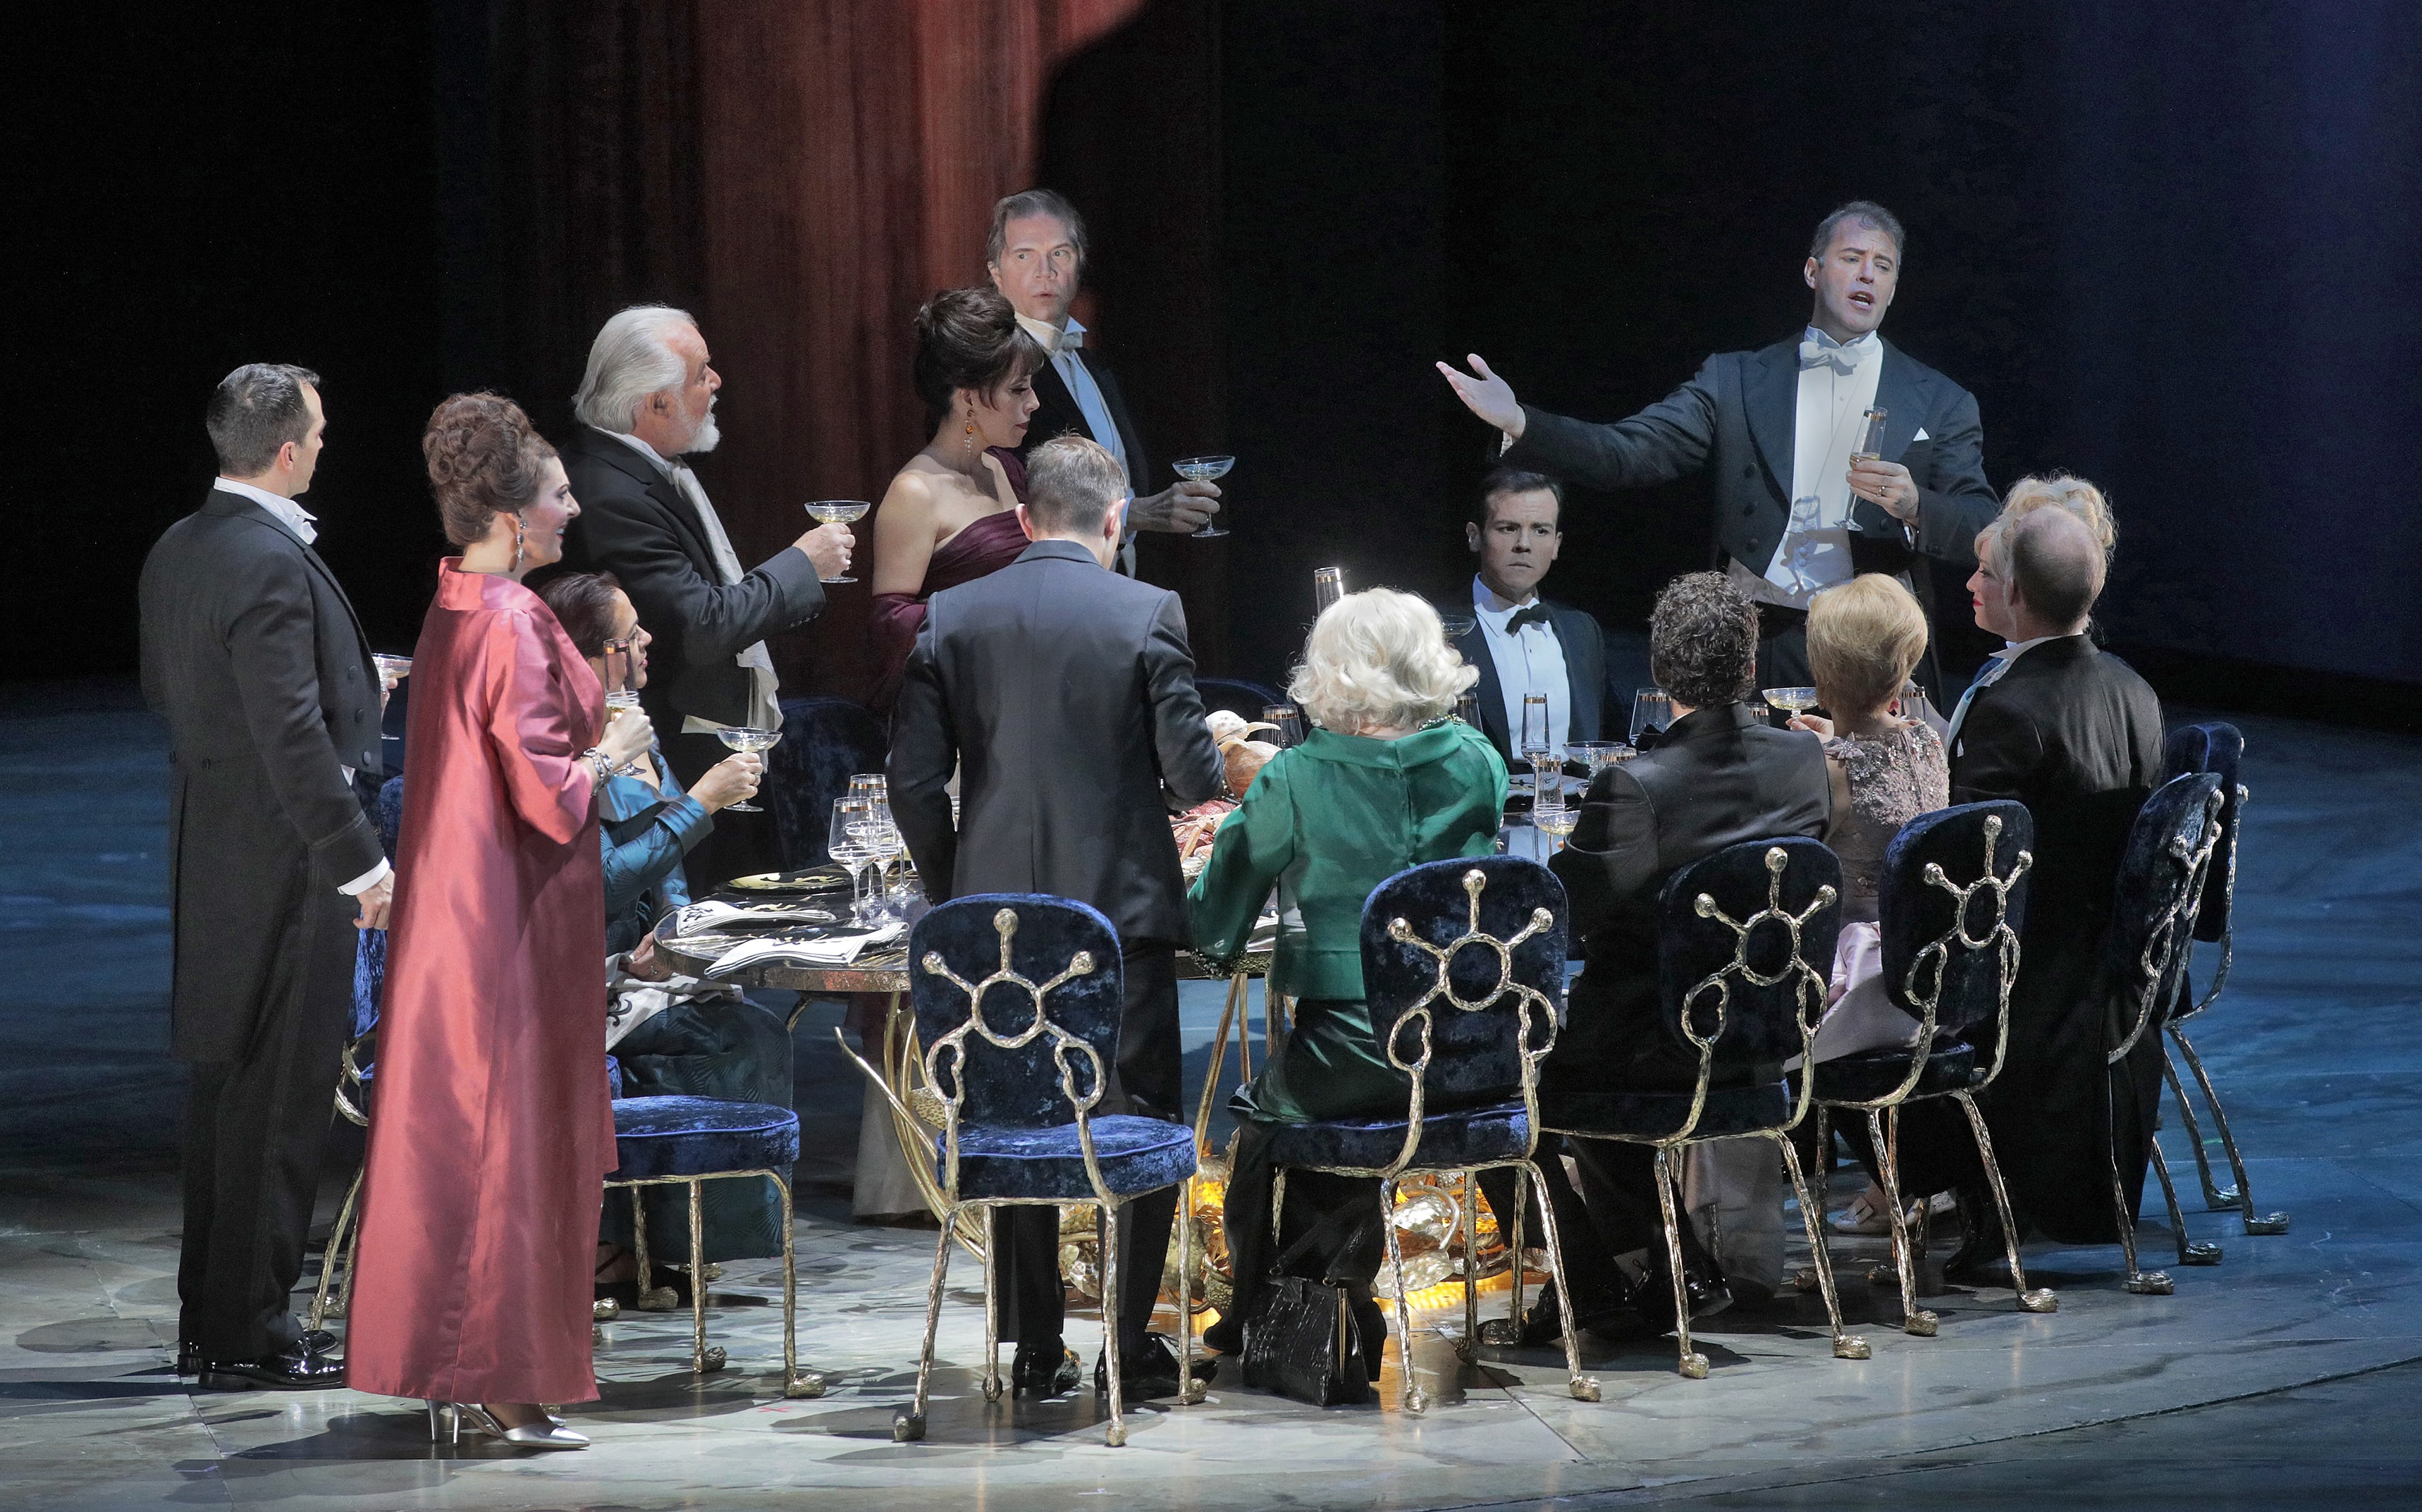 A scene from The Exterminating Angel at Metropolitan Opera